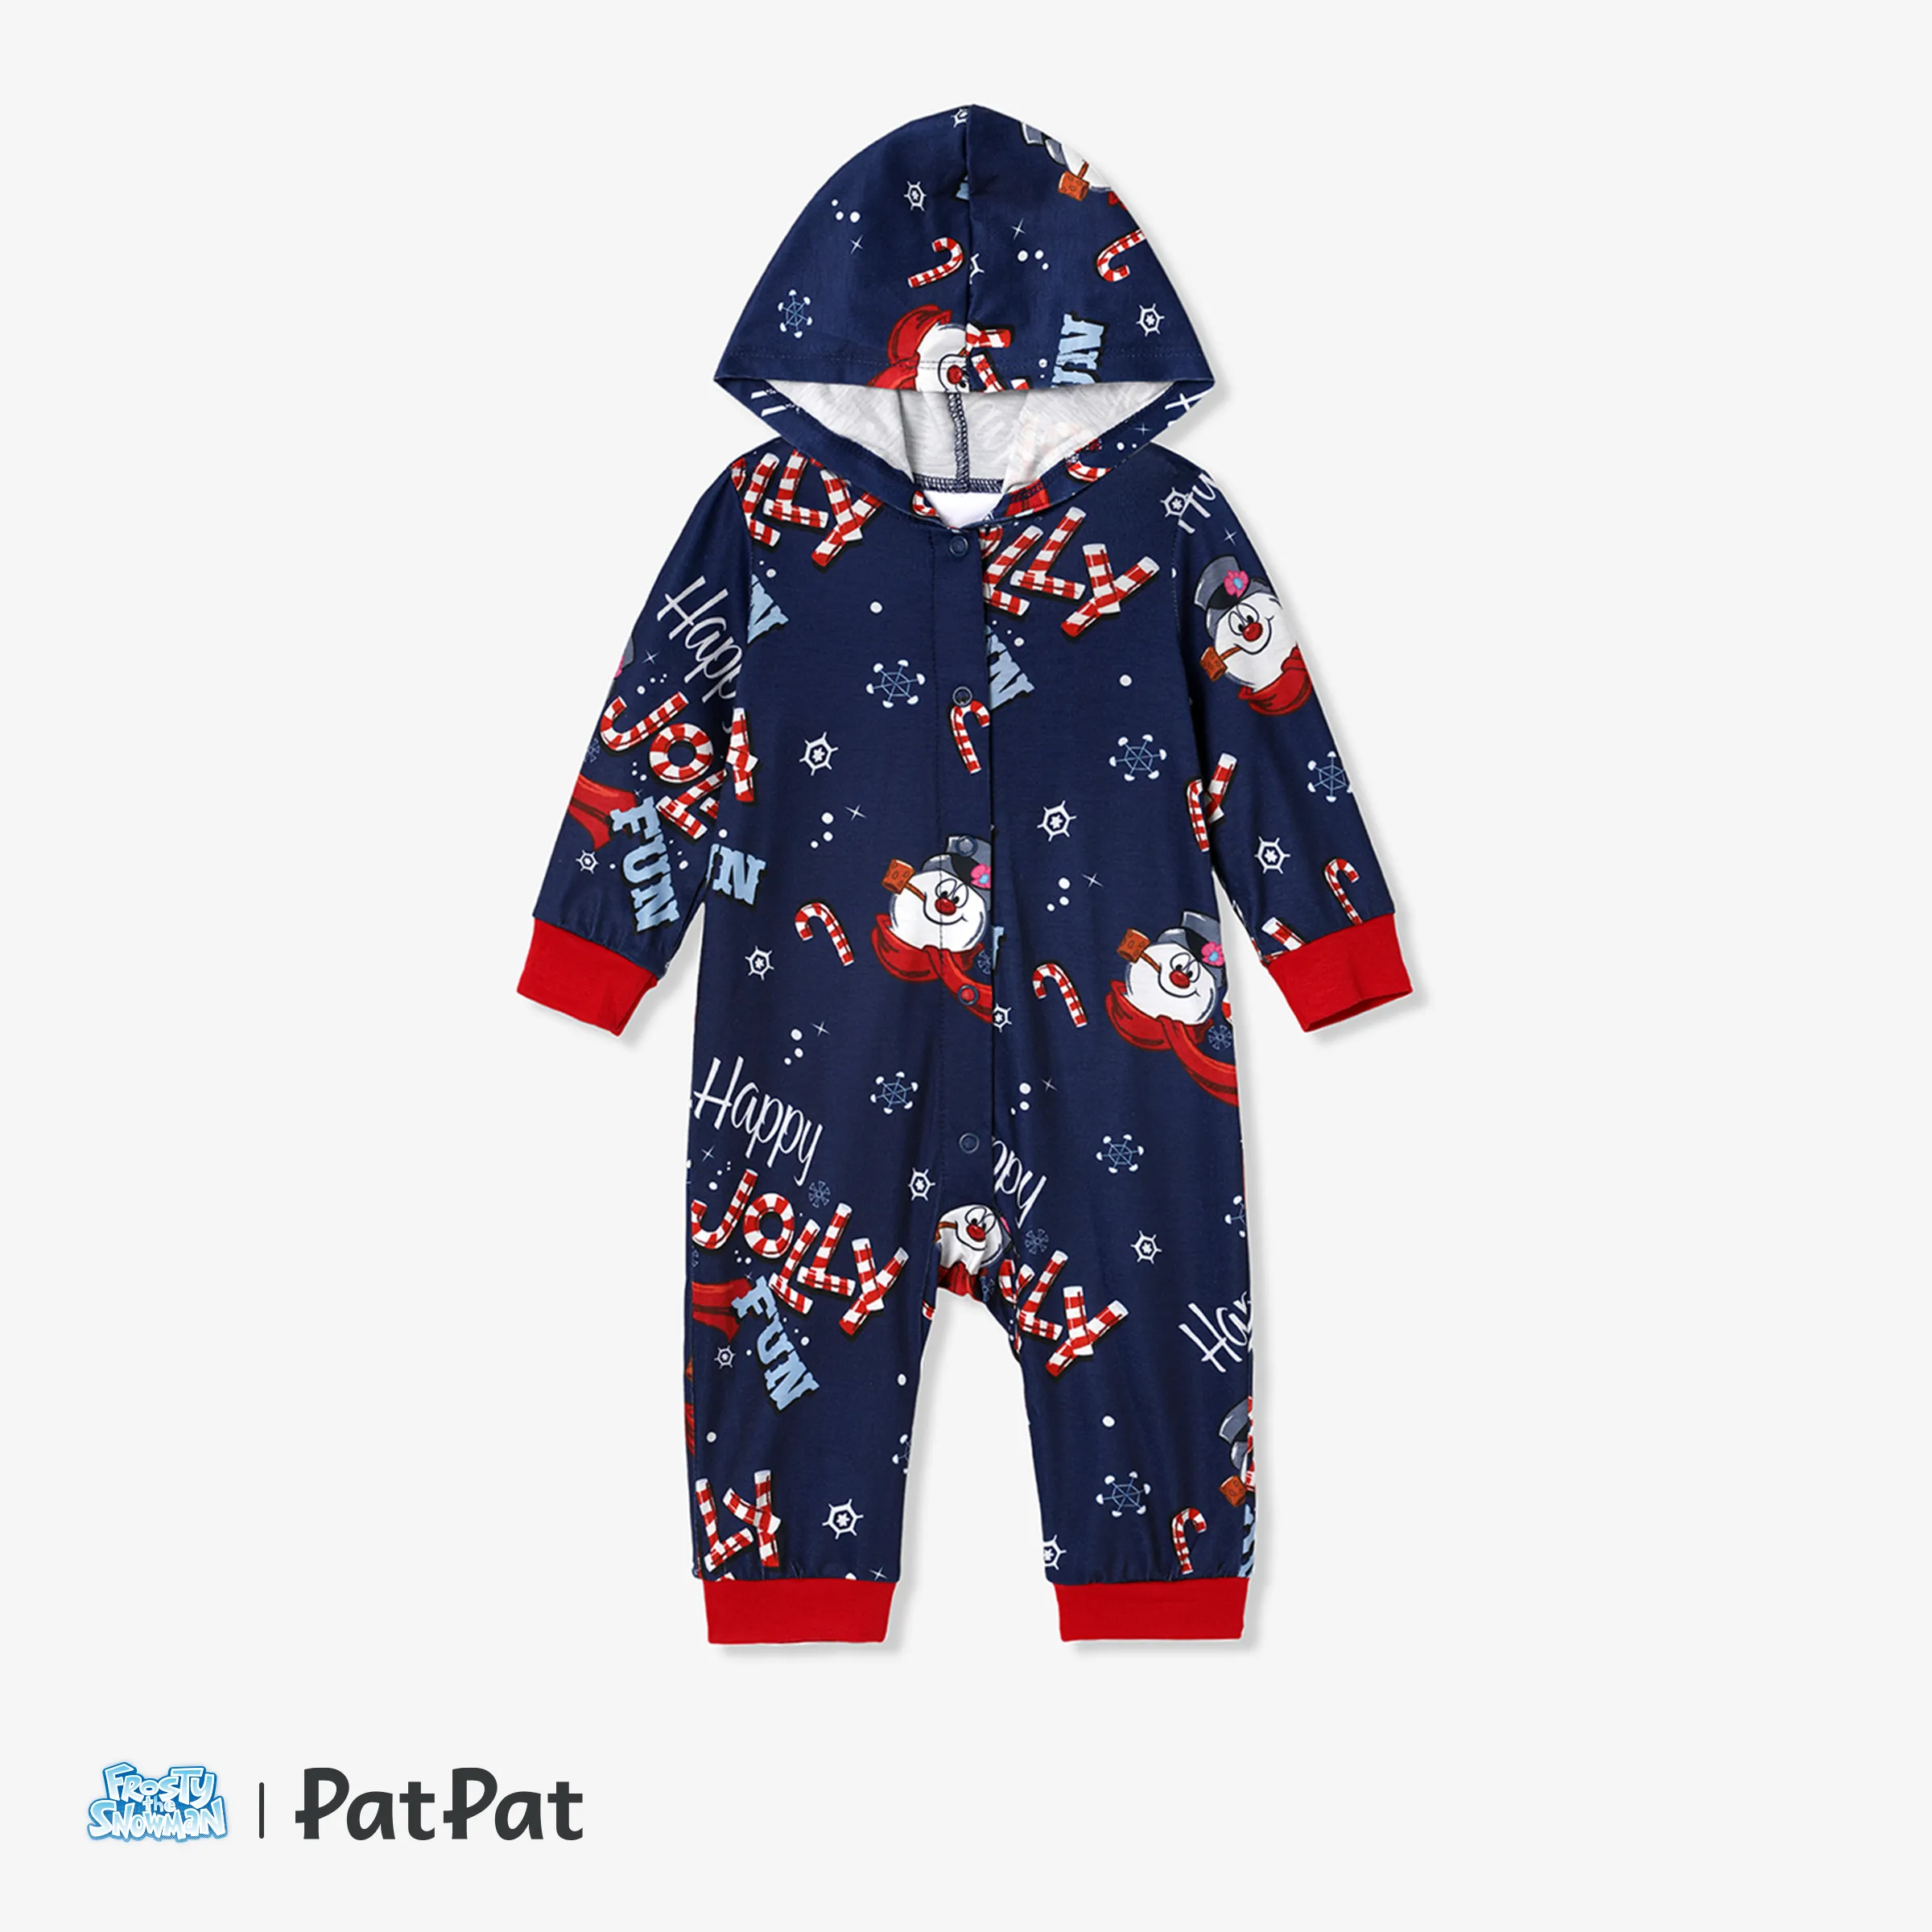 Frosty The Snowman Family Matching Noël Allover Zip-up Hooded Onesies Pajamas